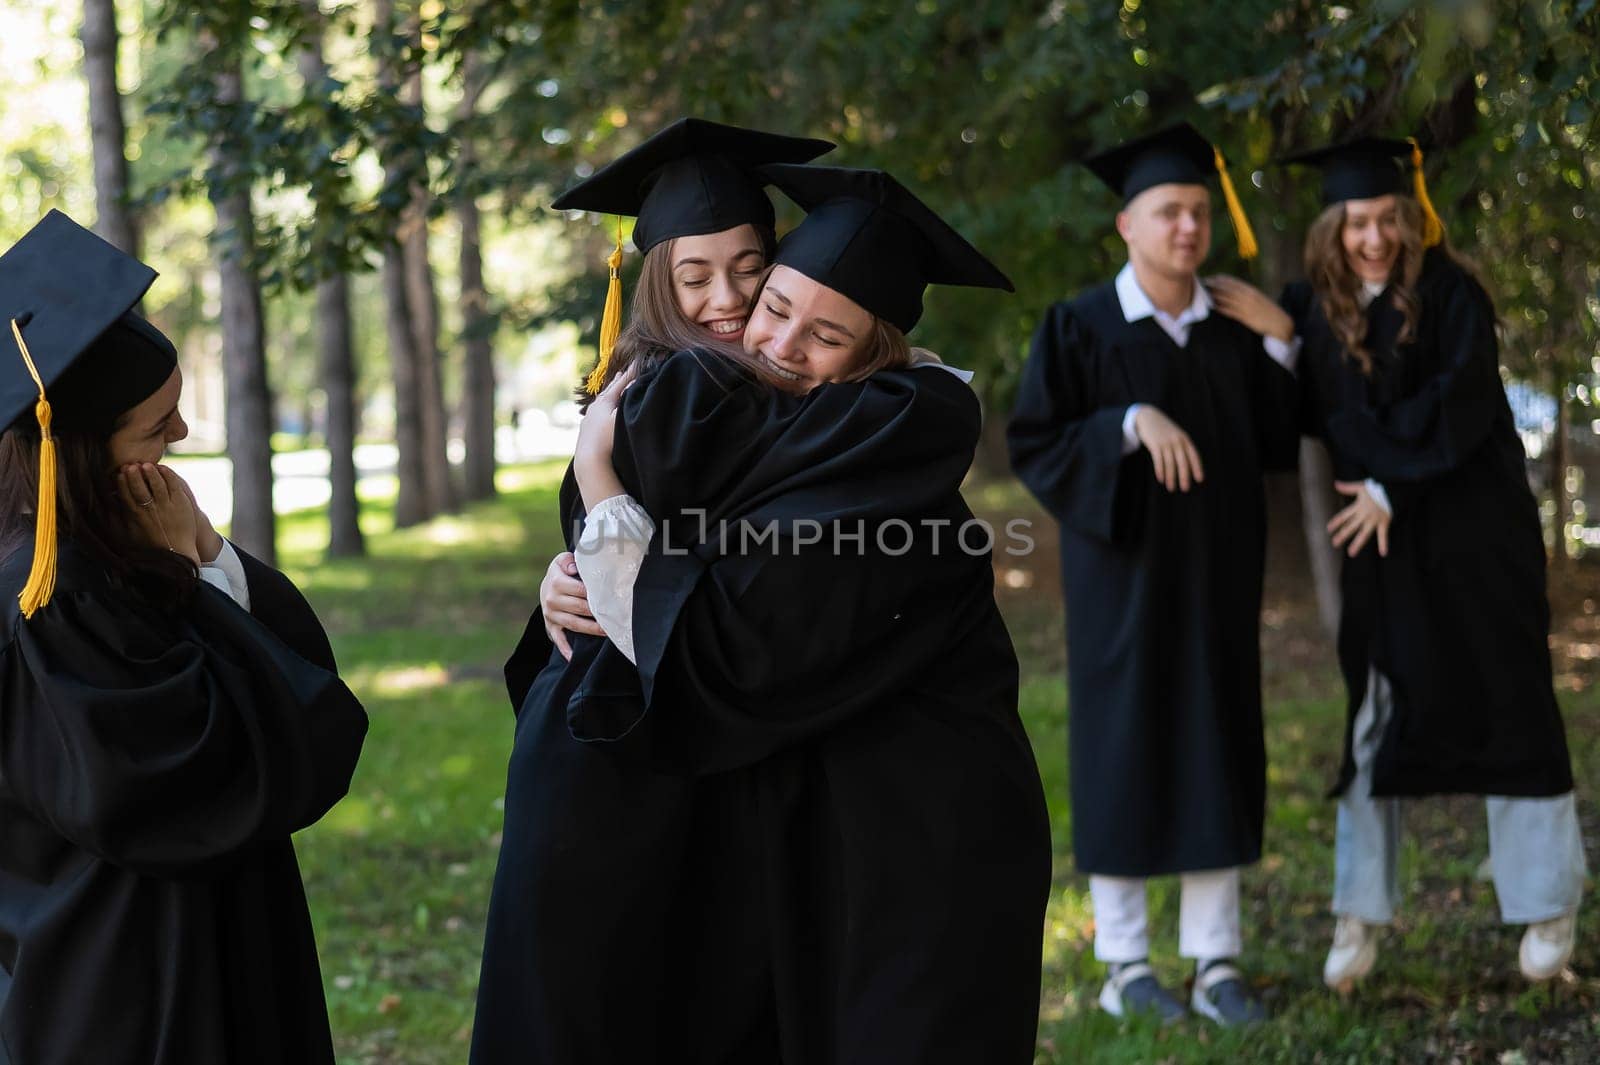 Group of happy students in graduation gowns outdoors. In the foreground, two young girls congratulate each other and embrace